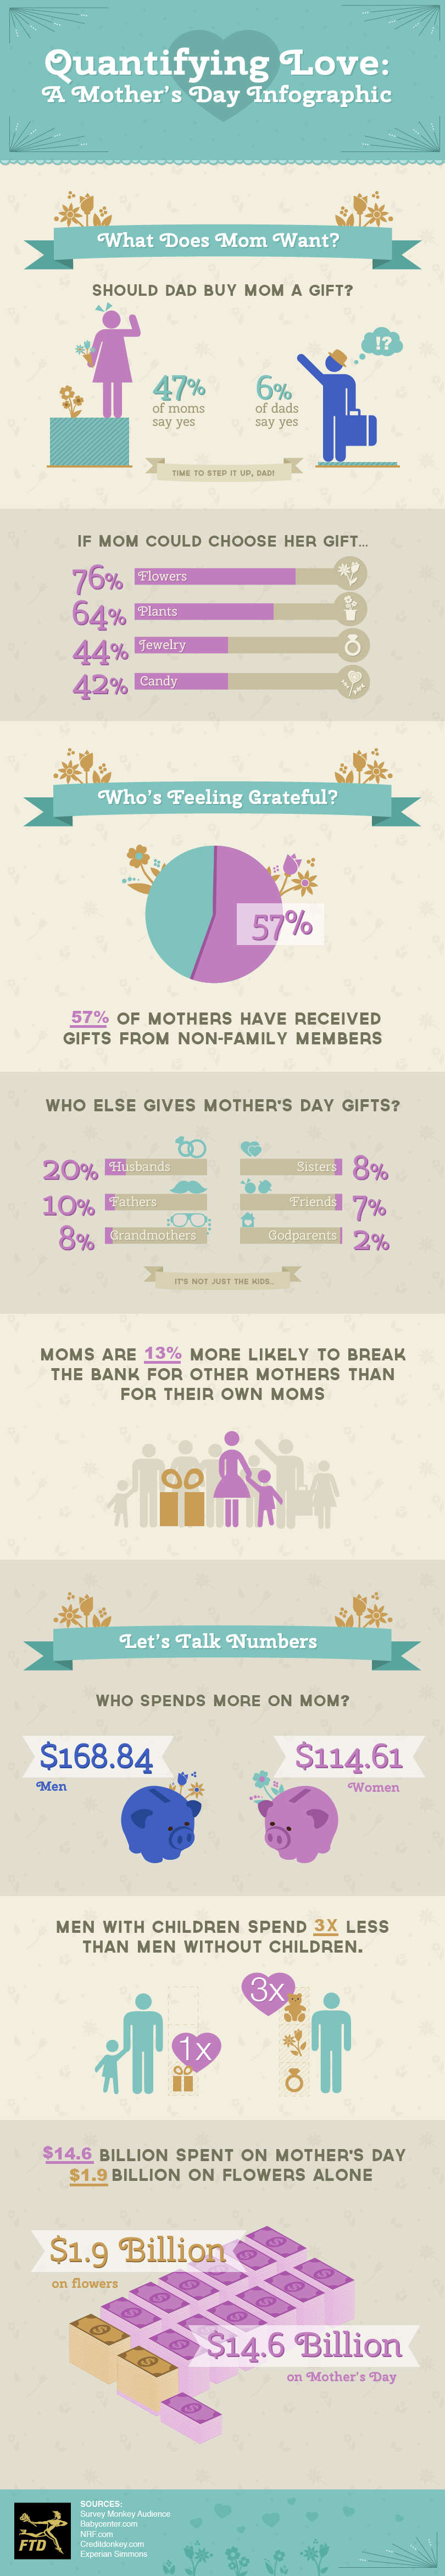 Quantifying Love: A Mother's Day Infographic